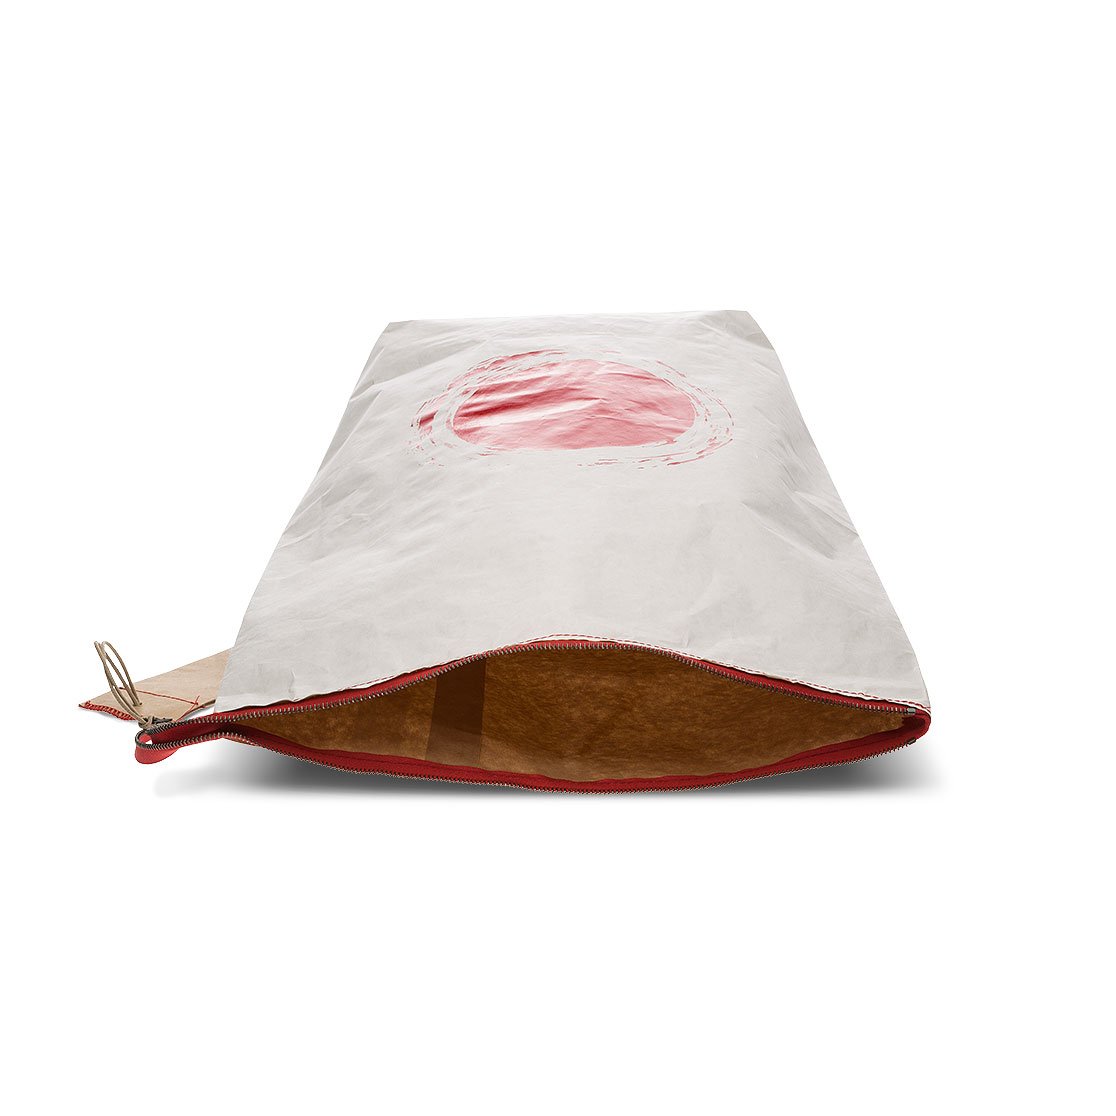 Paper bag double sheet with zip and label